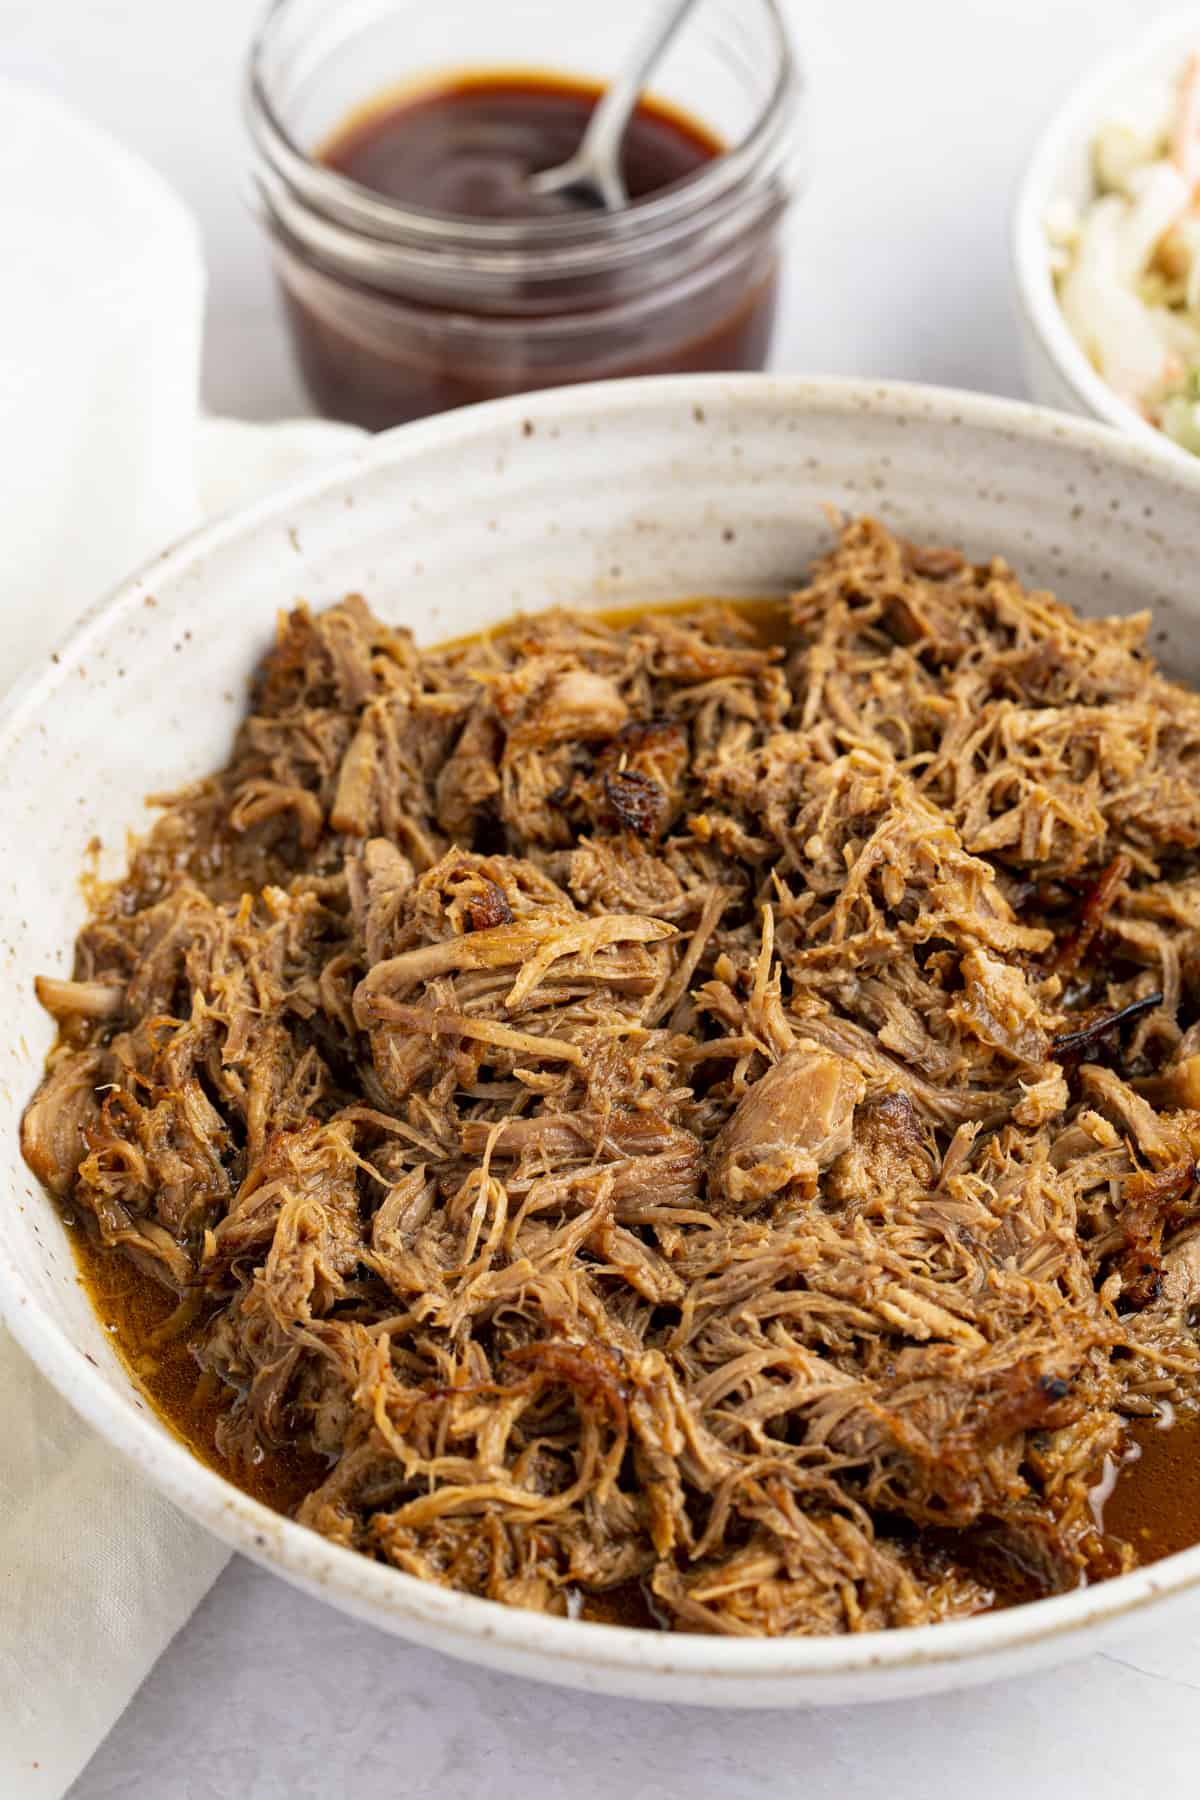 Mouthwatering Instant Pot pulled pork ready to serve